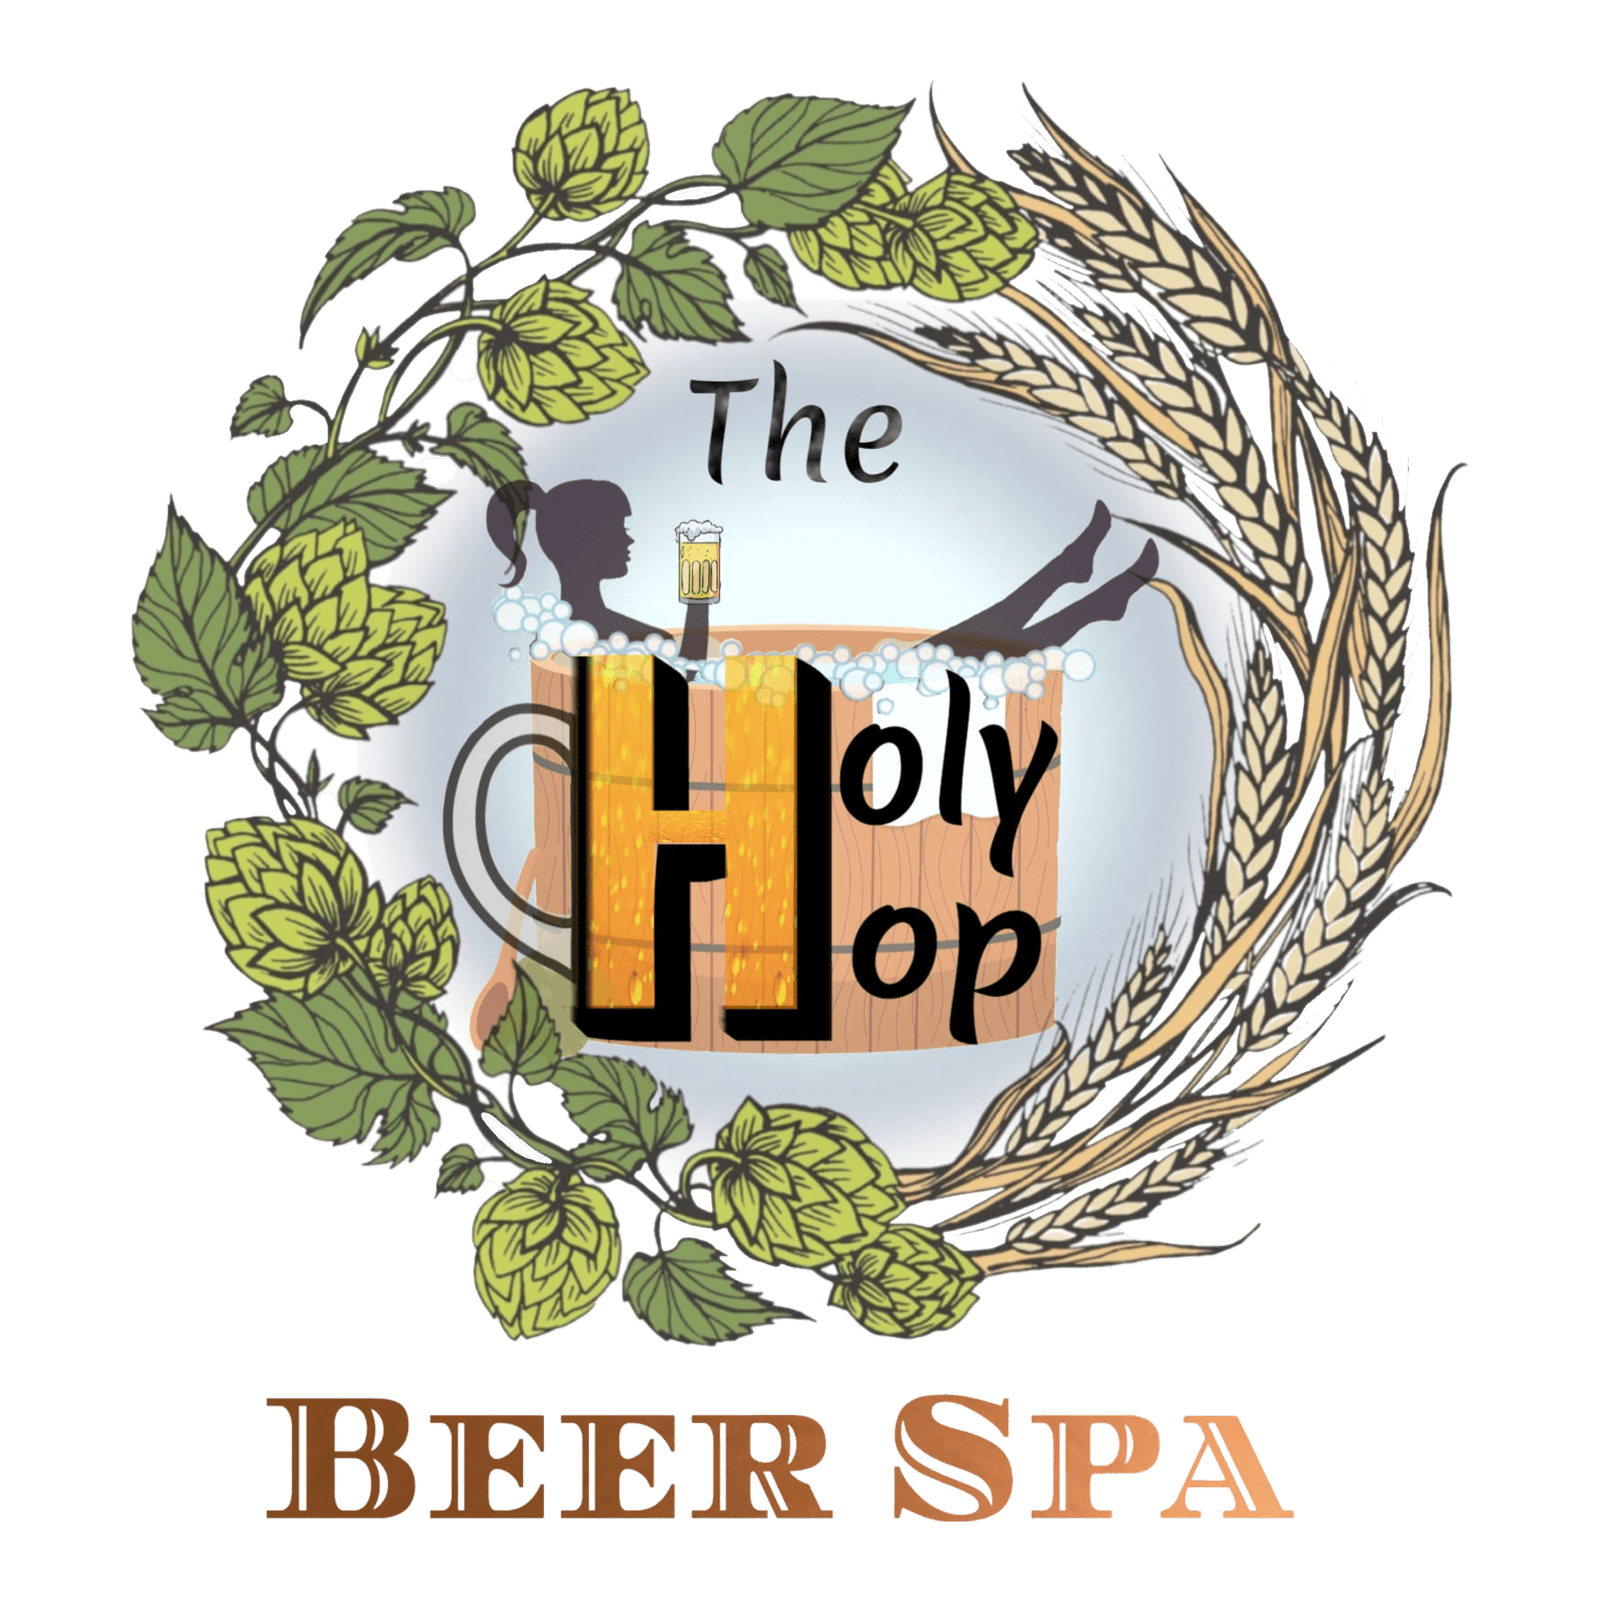 The Holy Hop